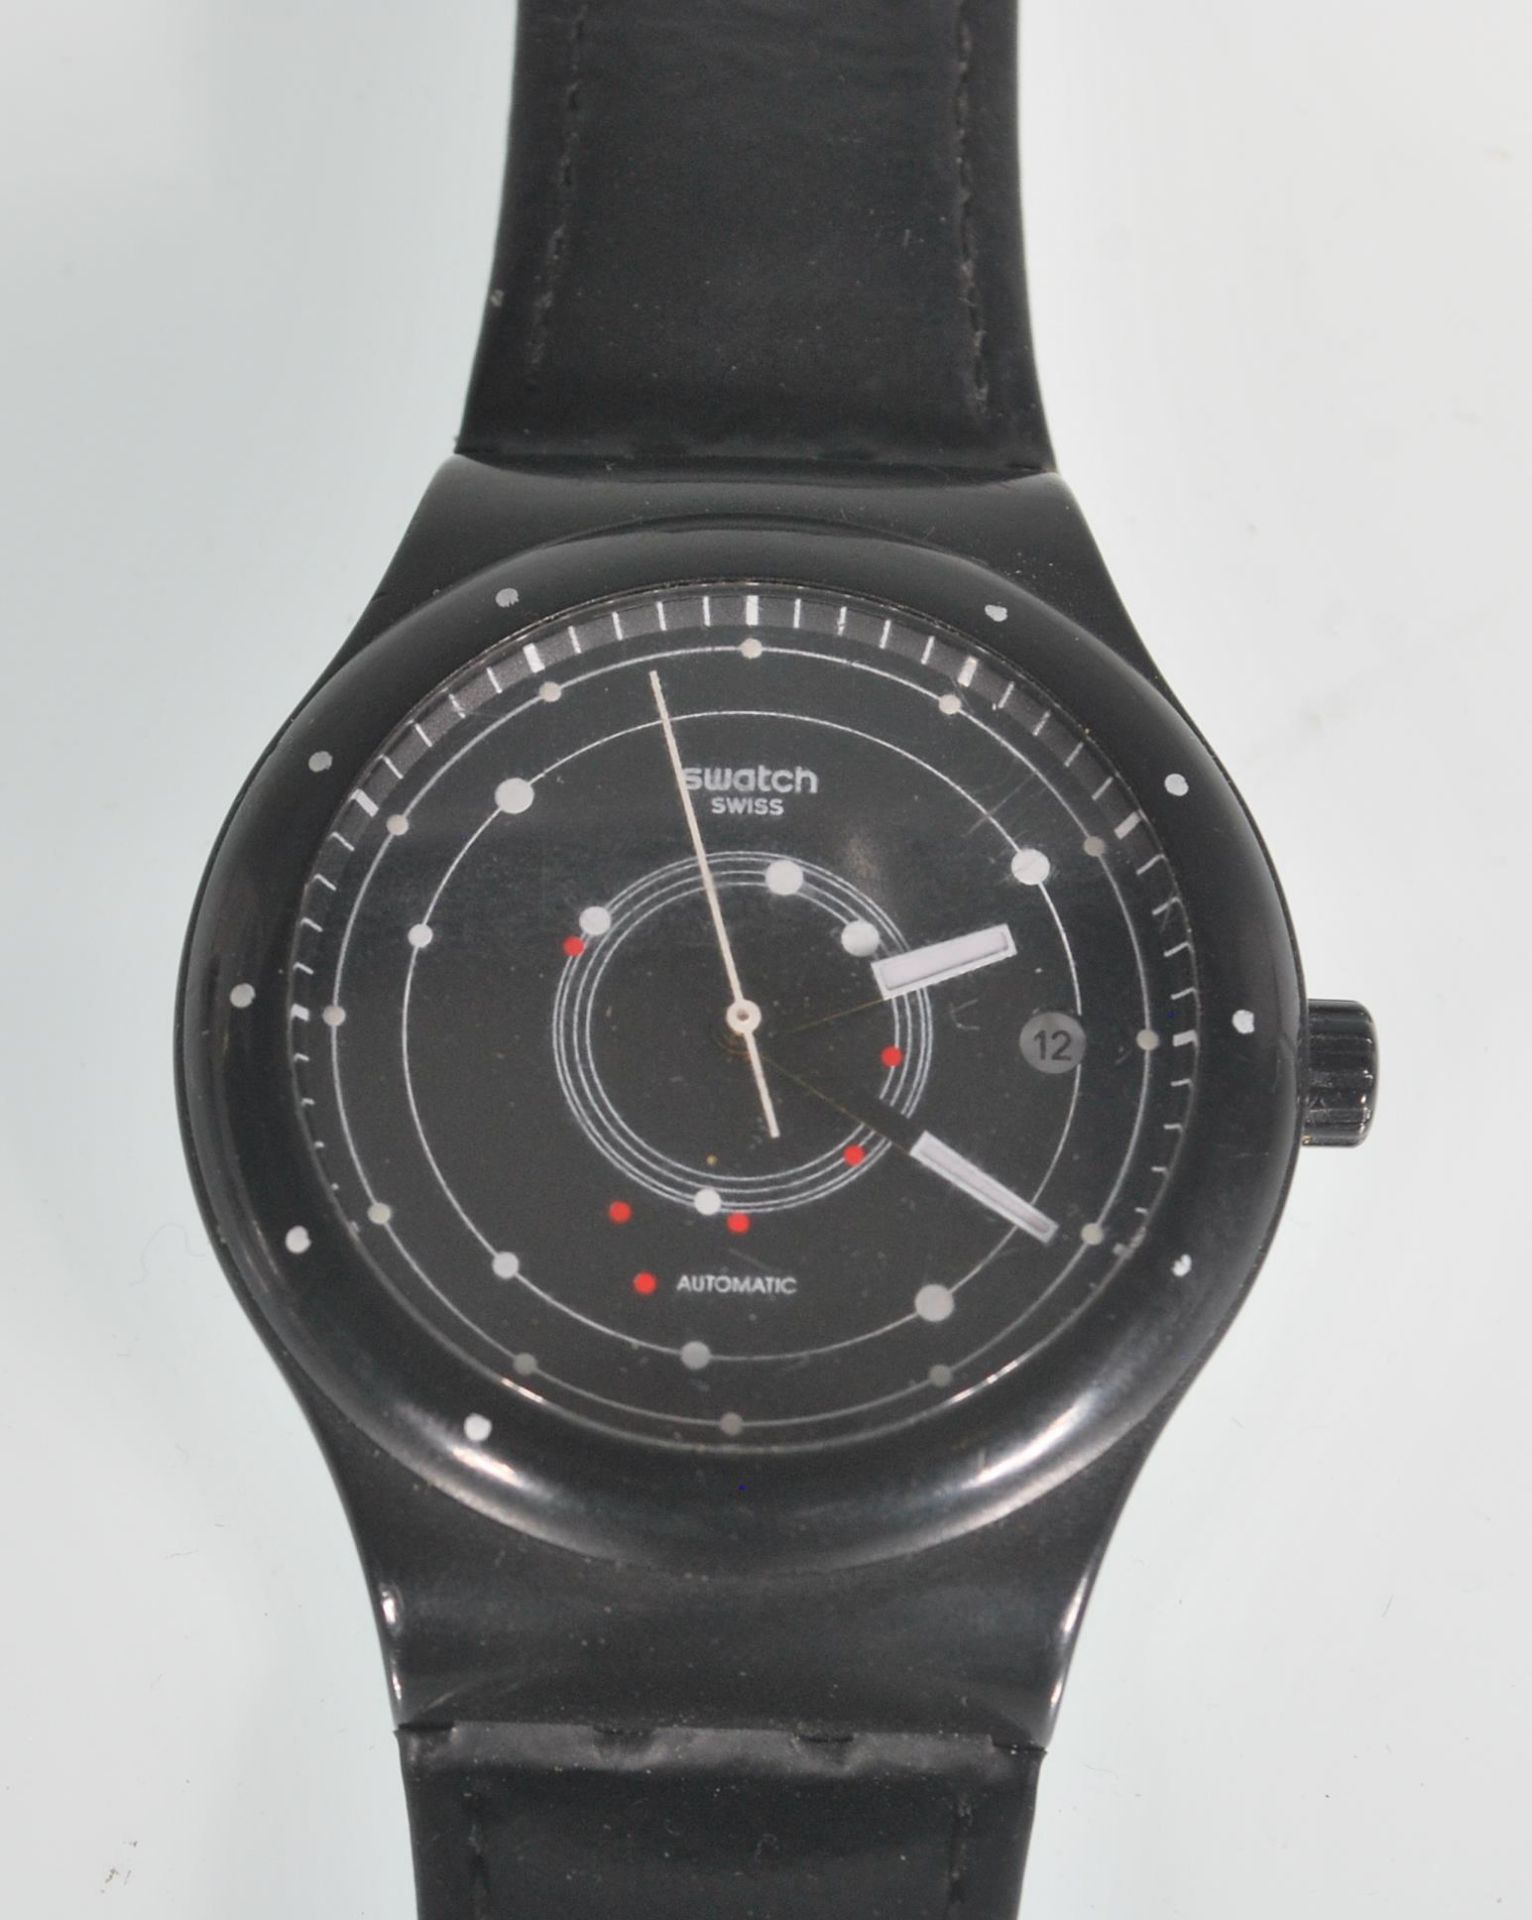 A Swatch Swiss Automatic wrist watch having a black face with a satellite design dial and date - Bild 2 aus 4